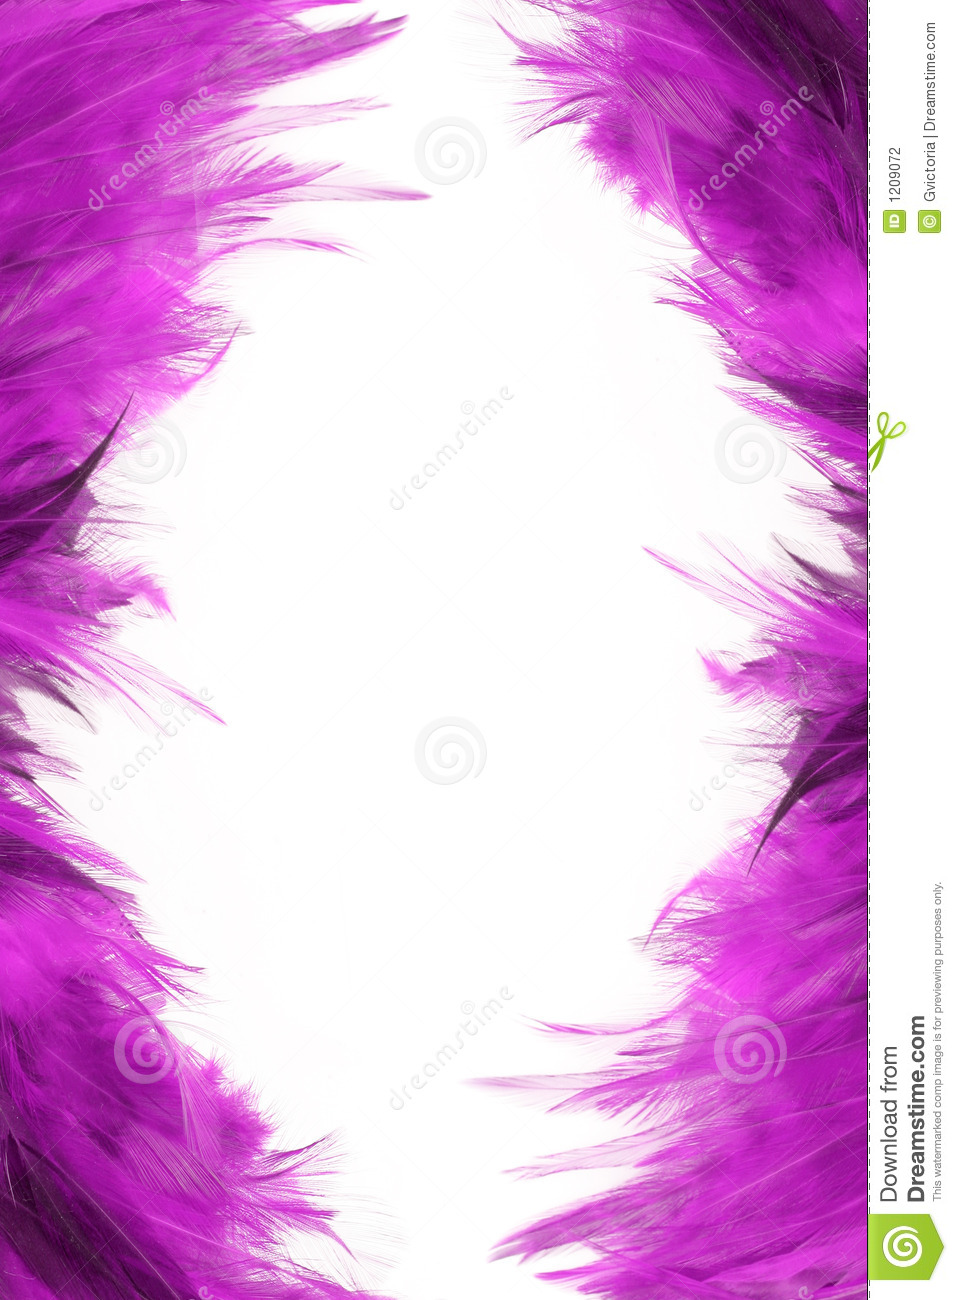 Feather Borders Stock Photography   Image  1209072